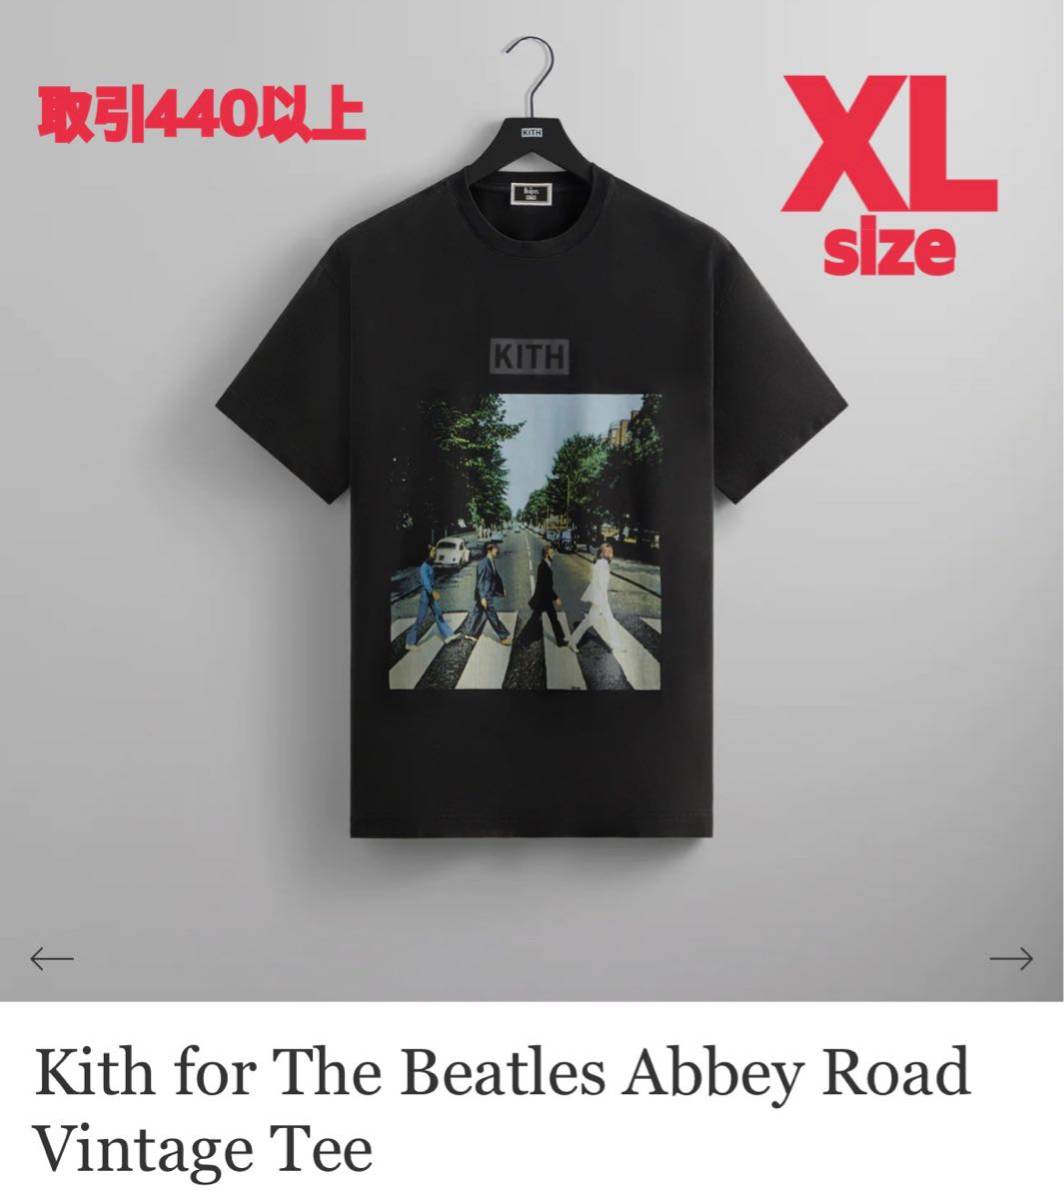 Kith for the Beatles Abbey Road Vintage Tee XLサイズ キス ザ ビートルズ アビイロード ヴィンテージ Tシャツ x-LARGE